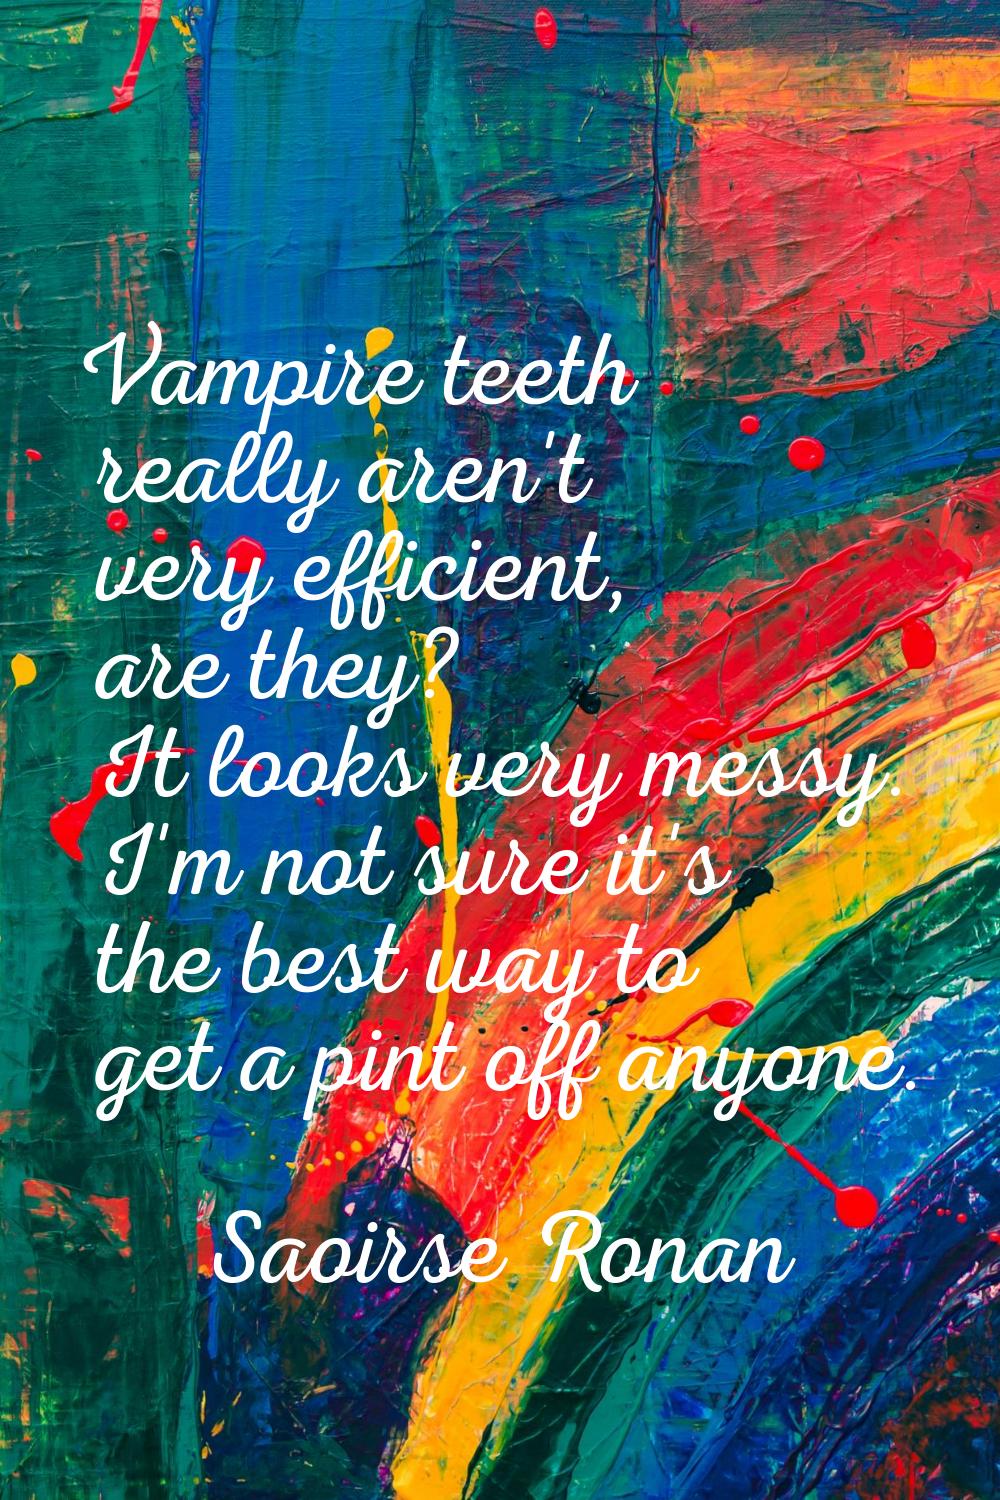 Vampire teeth really aren't very efficient, are they? It looks very messy. I'm not sure it's the be